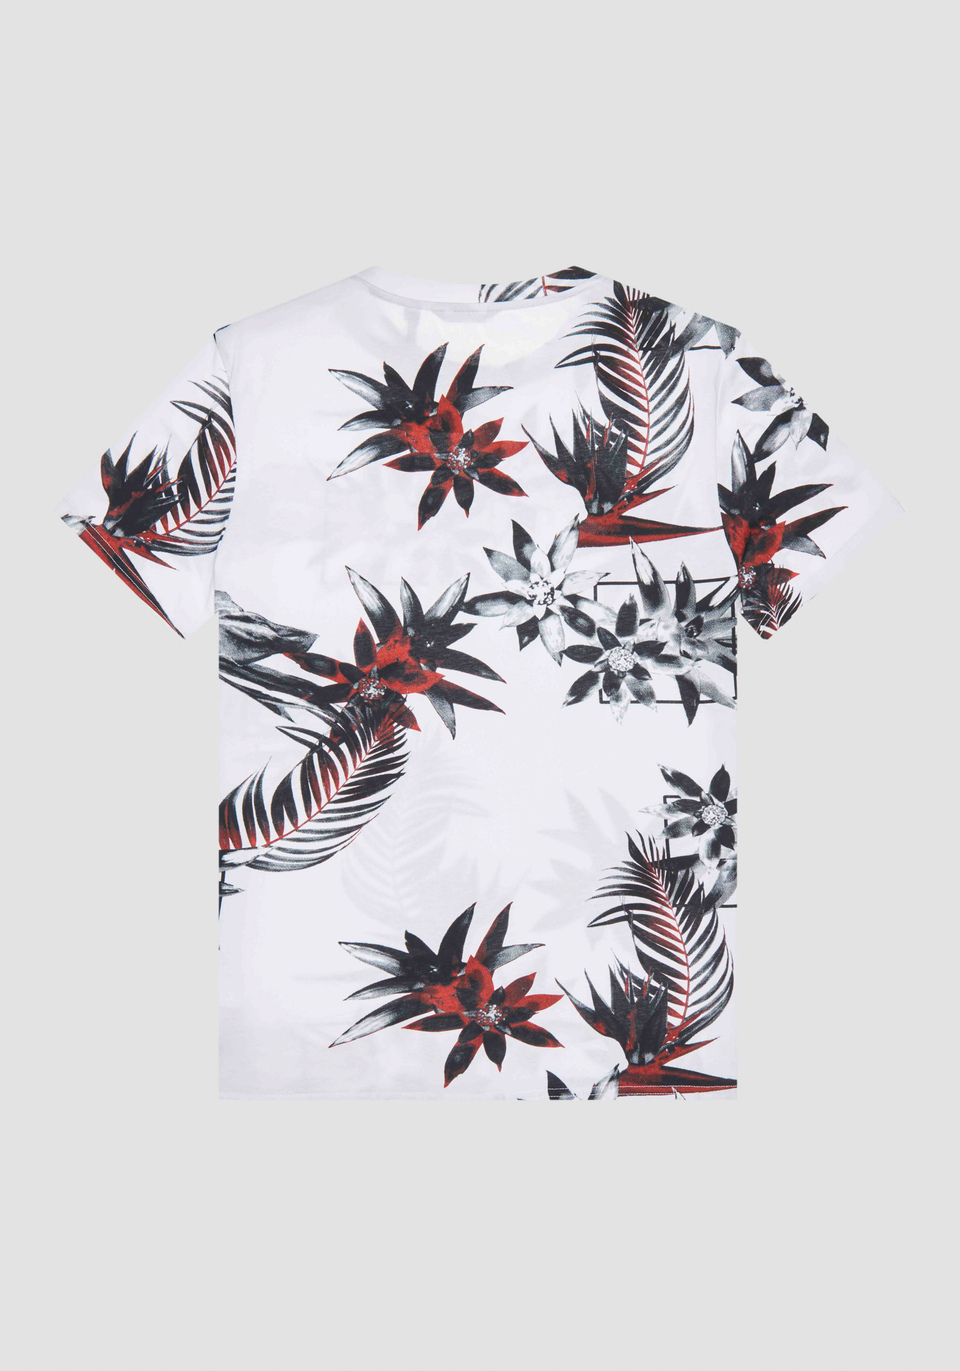 REGULAR FIT T-SHIRT IN COTTON JERSEY WITH ALL-OVER FLORAL PRINT - Antony Morato Online Shop